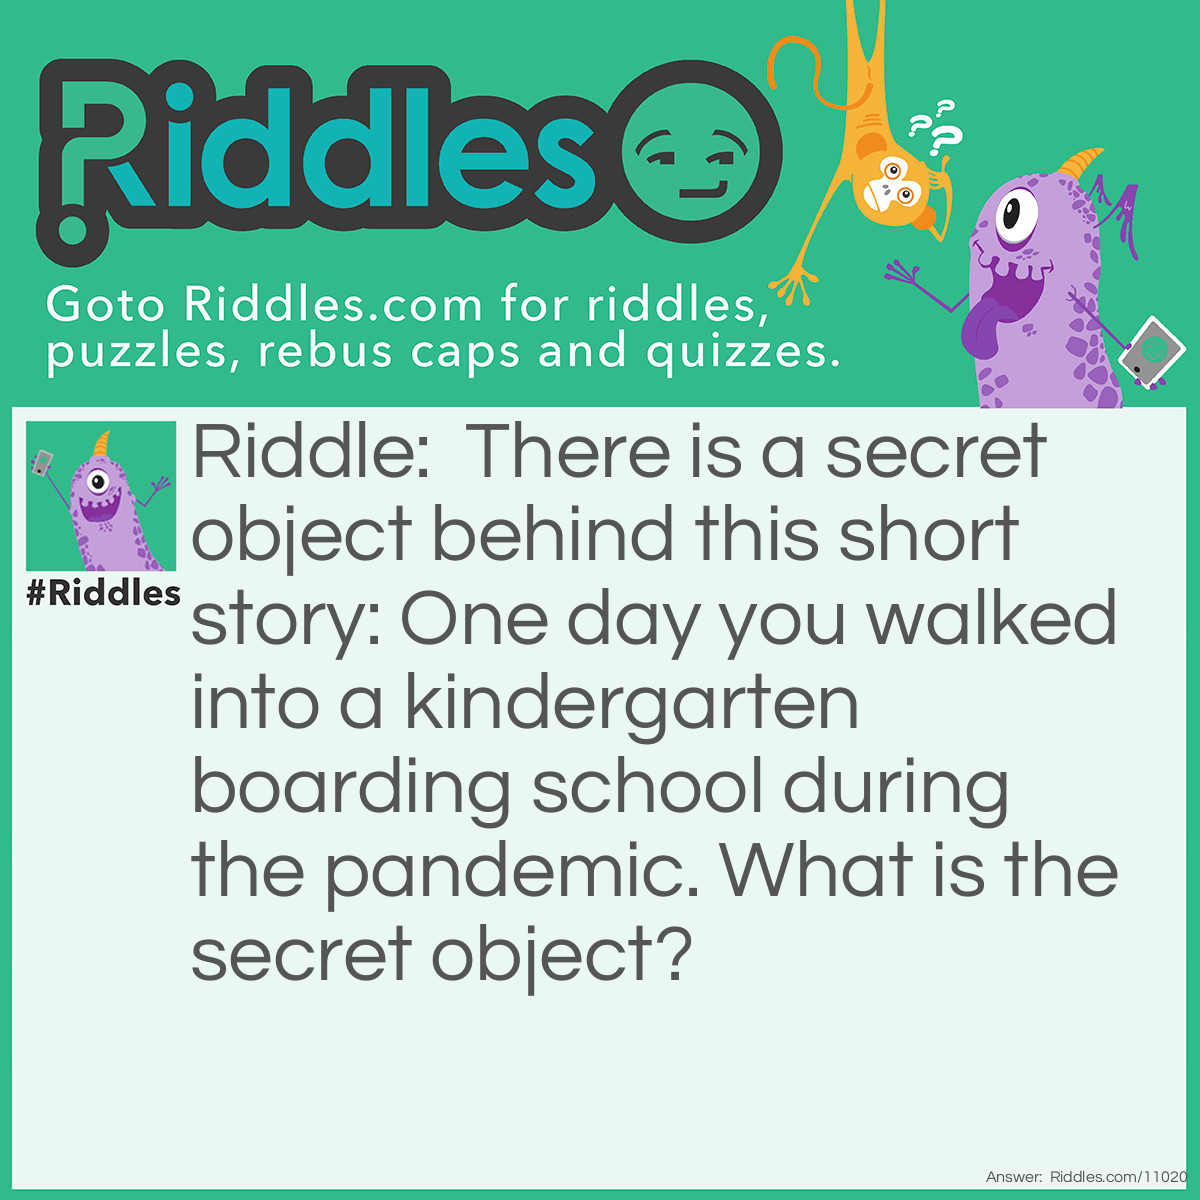 Riddle: There is a secret object behind this short story: One day you walked into a <a href="https://www.riddles.com/post/71/riddles-for-kindergartners">kindergarten</a> boarding school during the pandemic. What is the secret object? Answer: It is a keyboard because you enter boarding schools and never exit and kindergarteners learn ABC & 123 and during the pandemic you need to social distance.